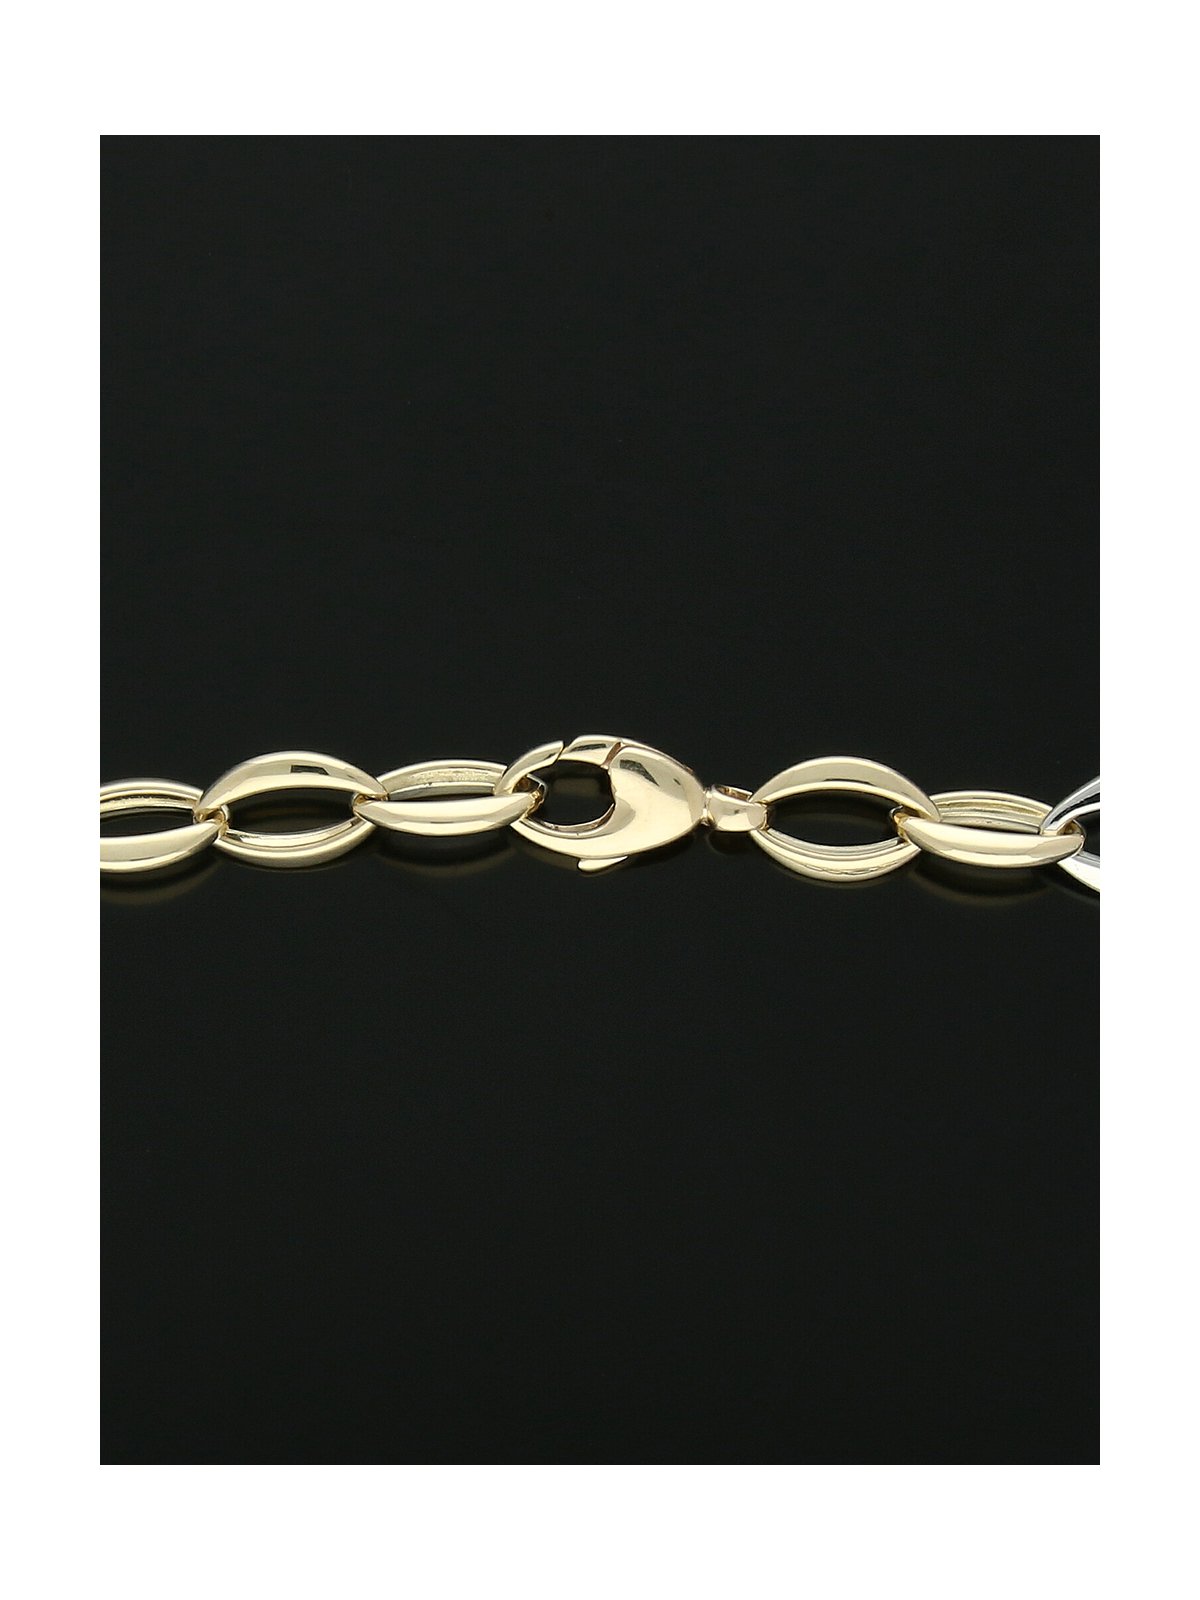 Oval Link Necklace in 9ct Yellow and White Gold